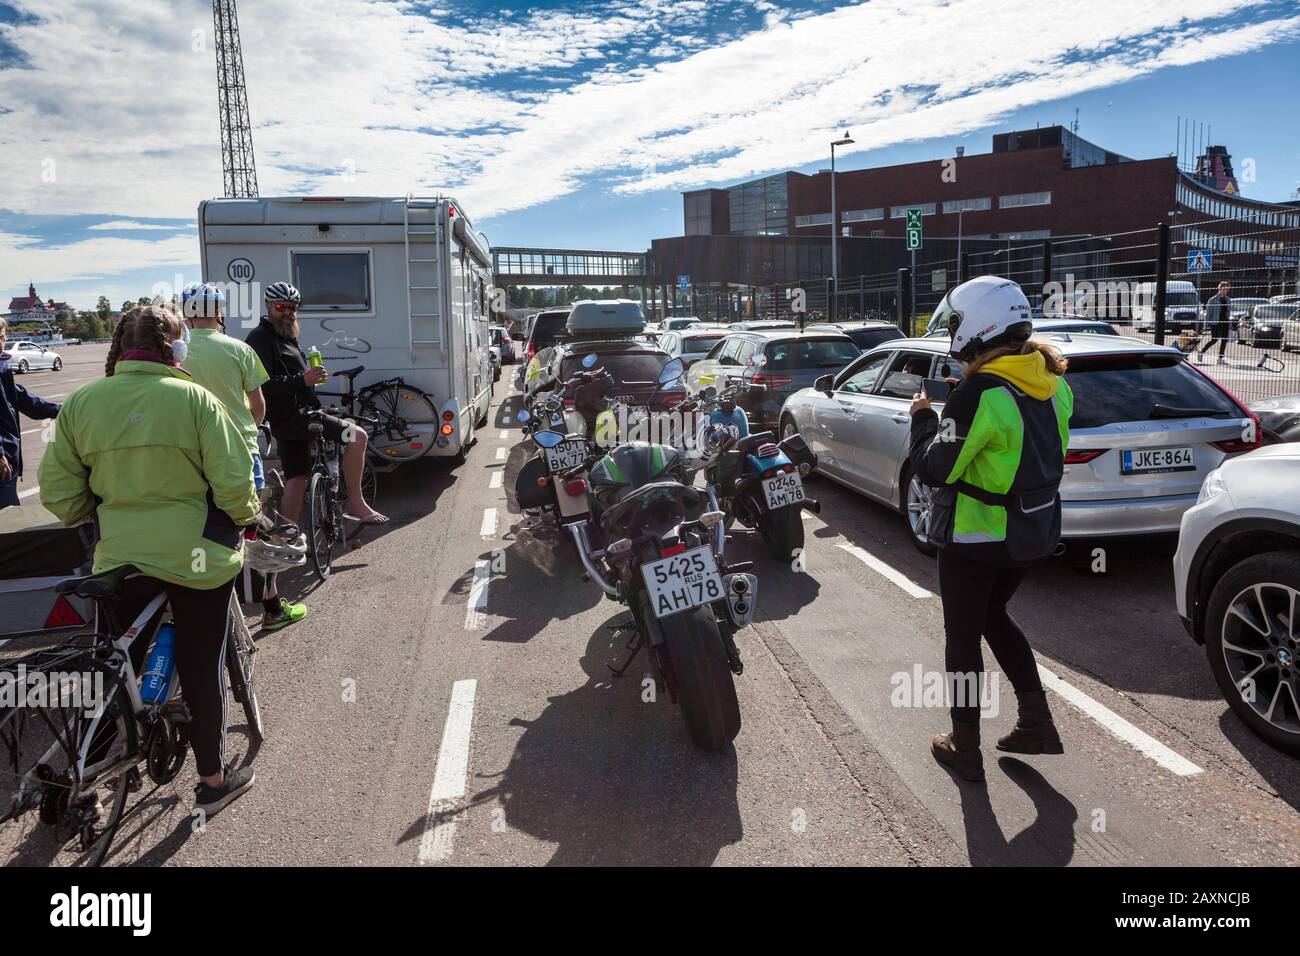 HELSINKI, FINLAND-CIRCA-JUN, 2018: Drivers, motorcyclists and cyclists wait embarkation in  passenger ship terminal of Helsinki seaport. Area for all Stock Photo